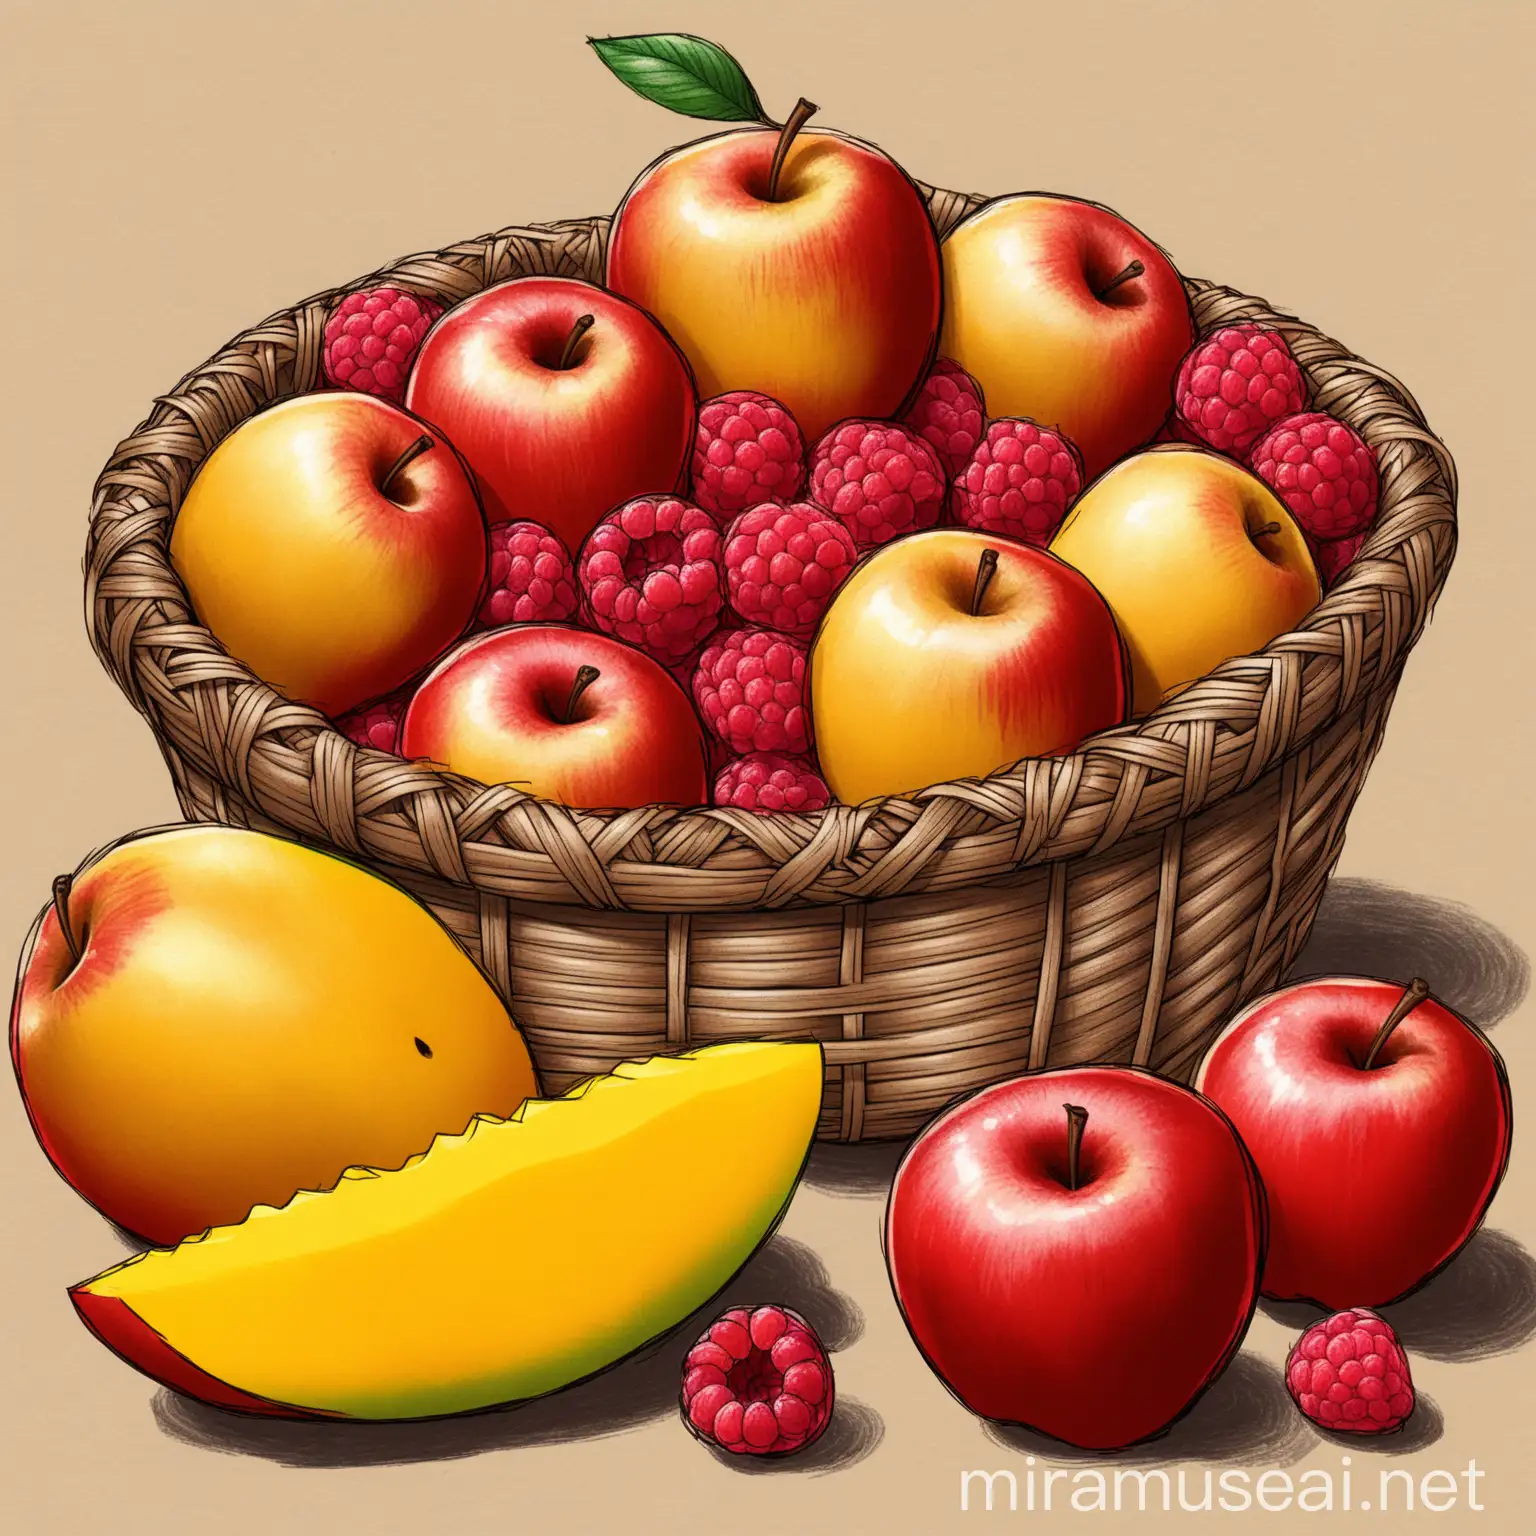 handdrawing of red apples, rasberries and  in a basket. slices of mango in the front